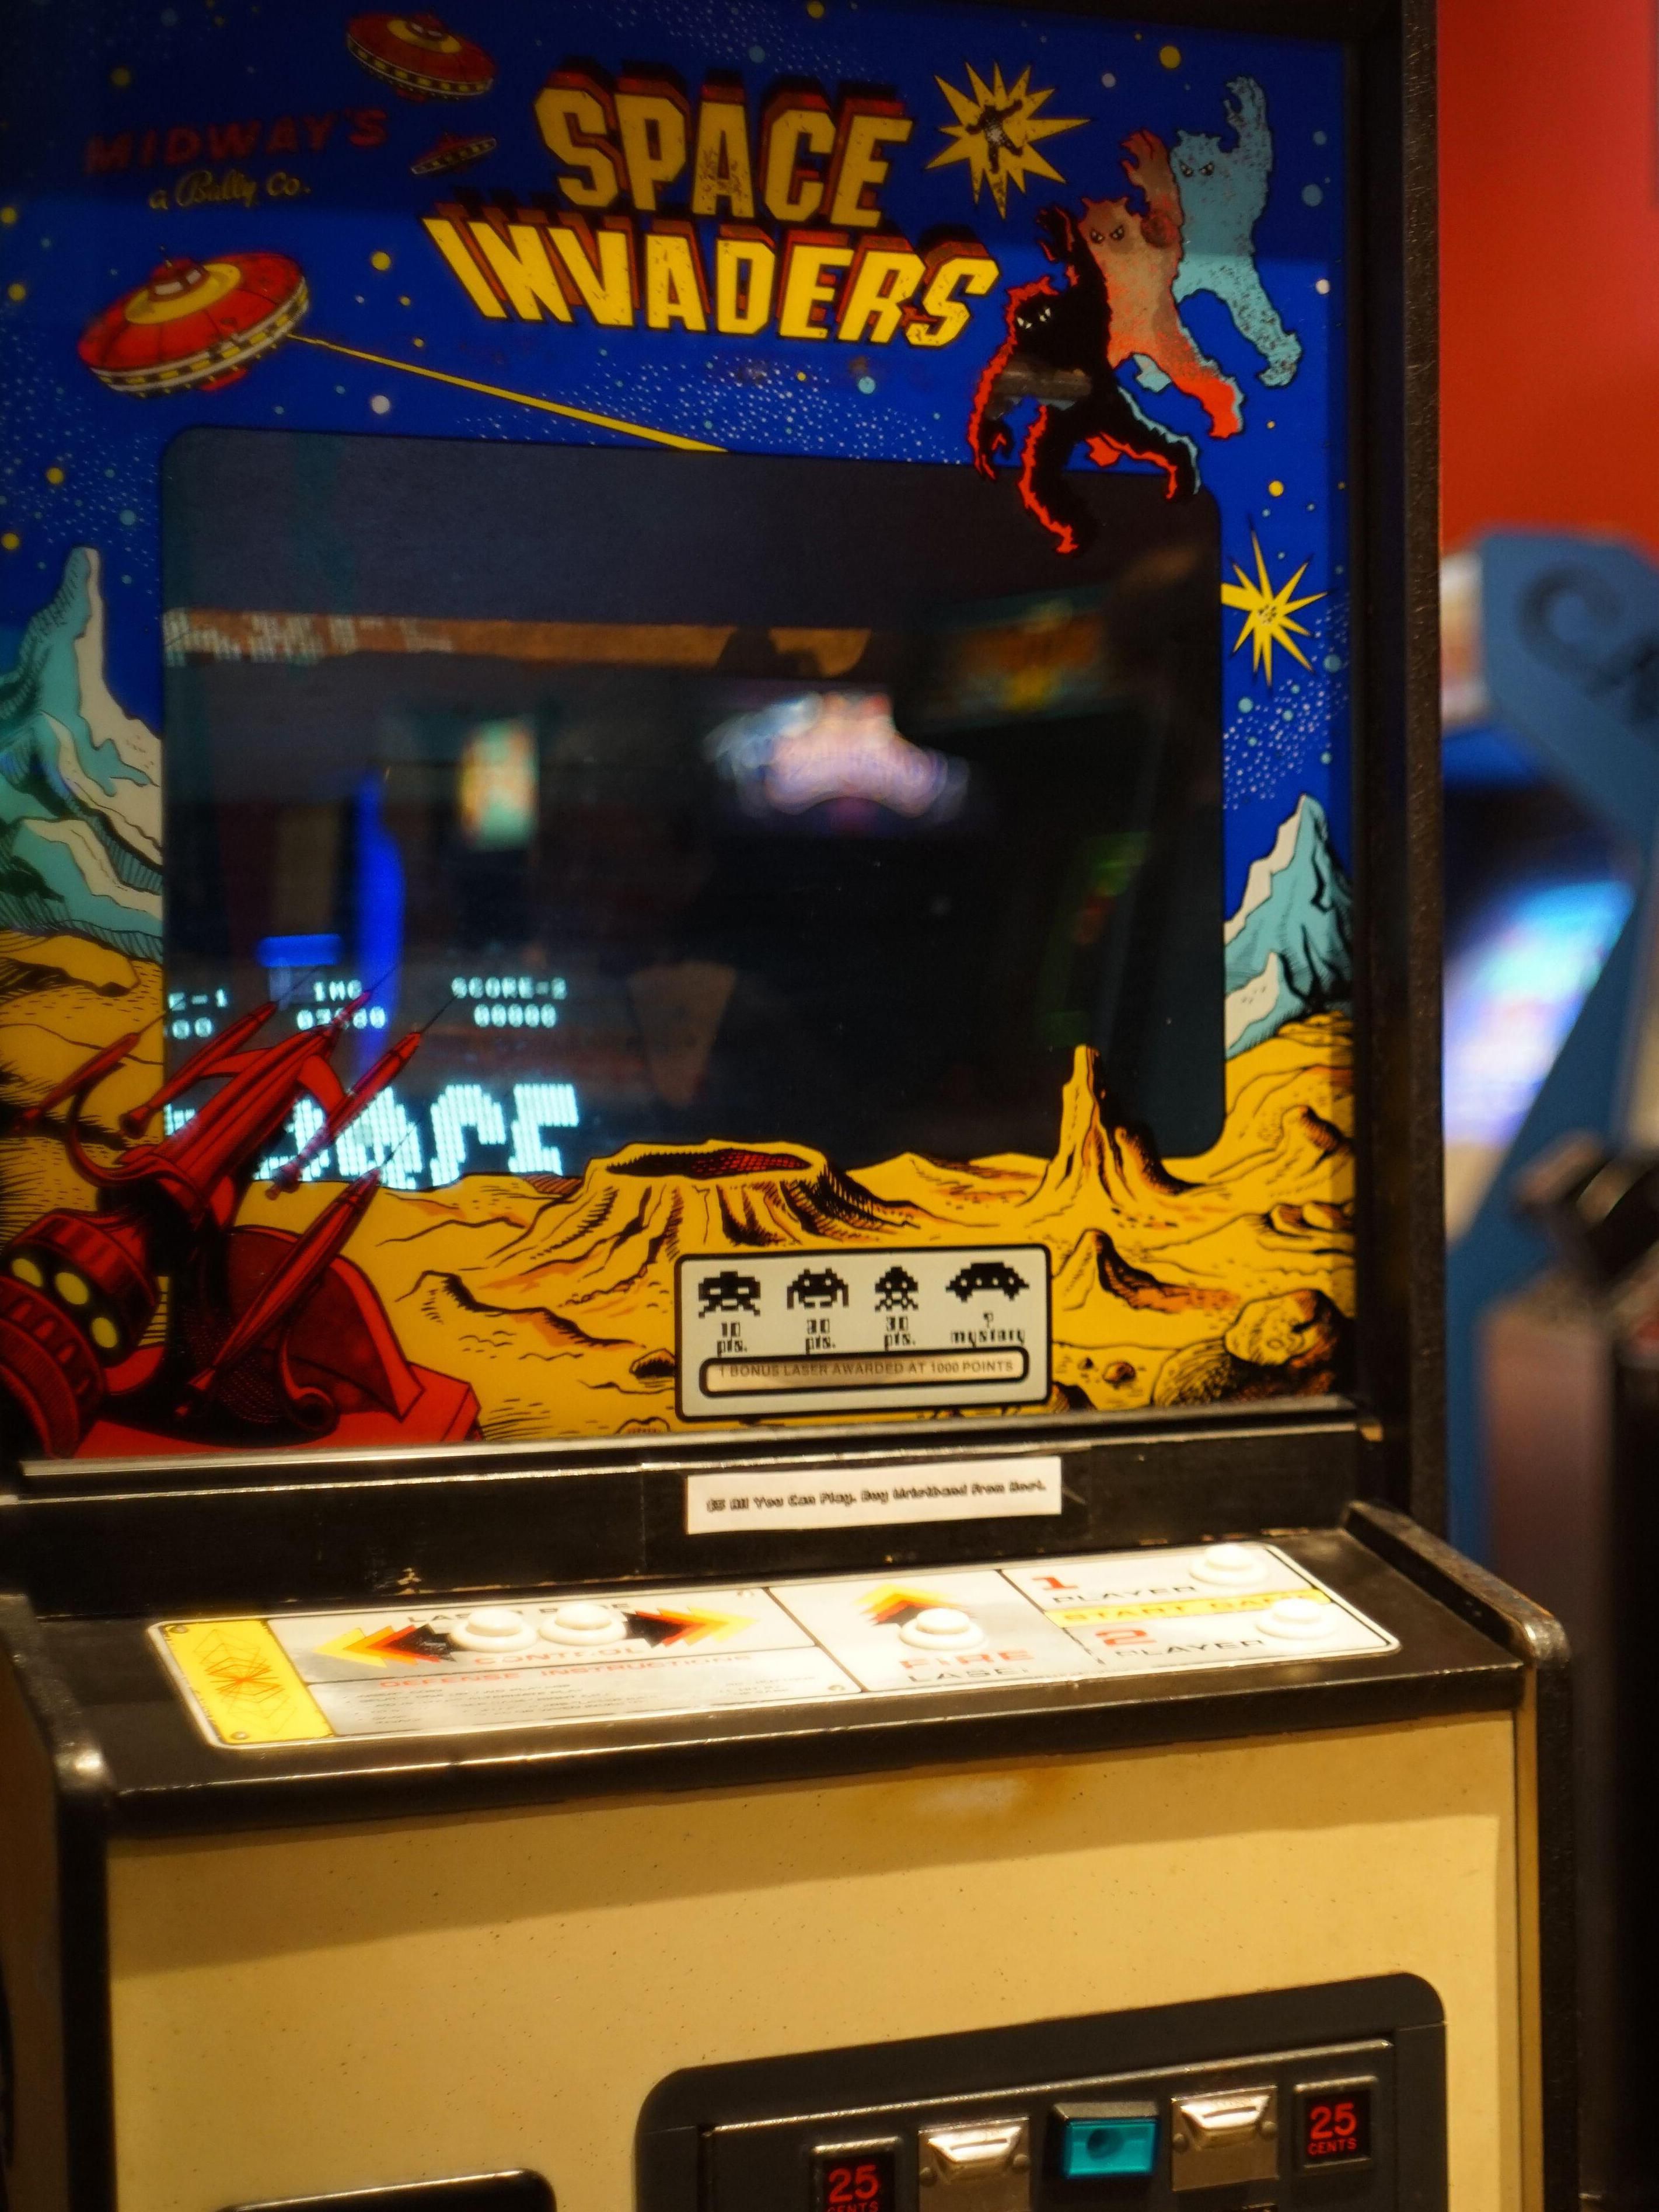 space invaders game in yellow cabinet with black and white screen, other arcade games blurred in background